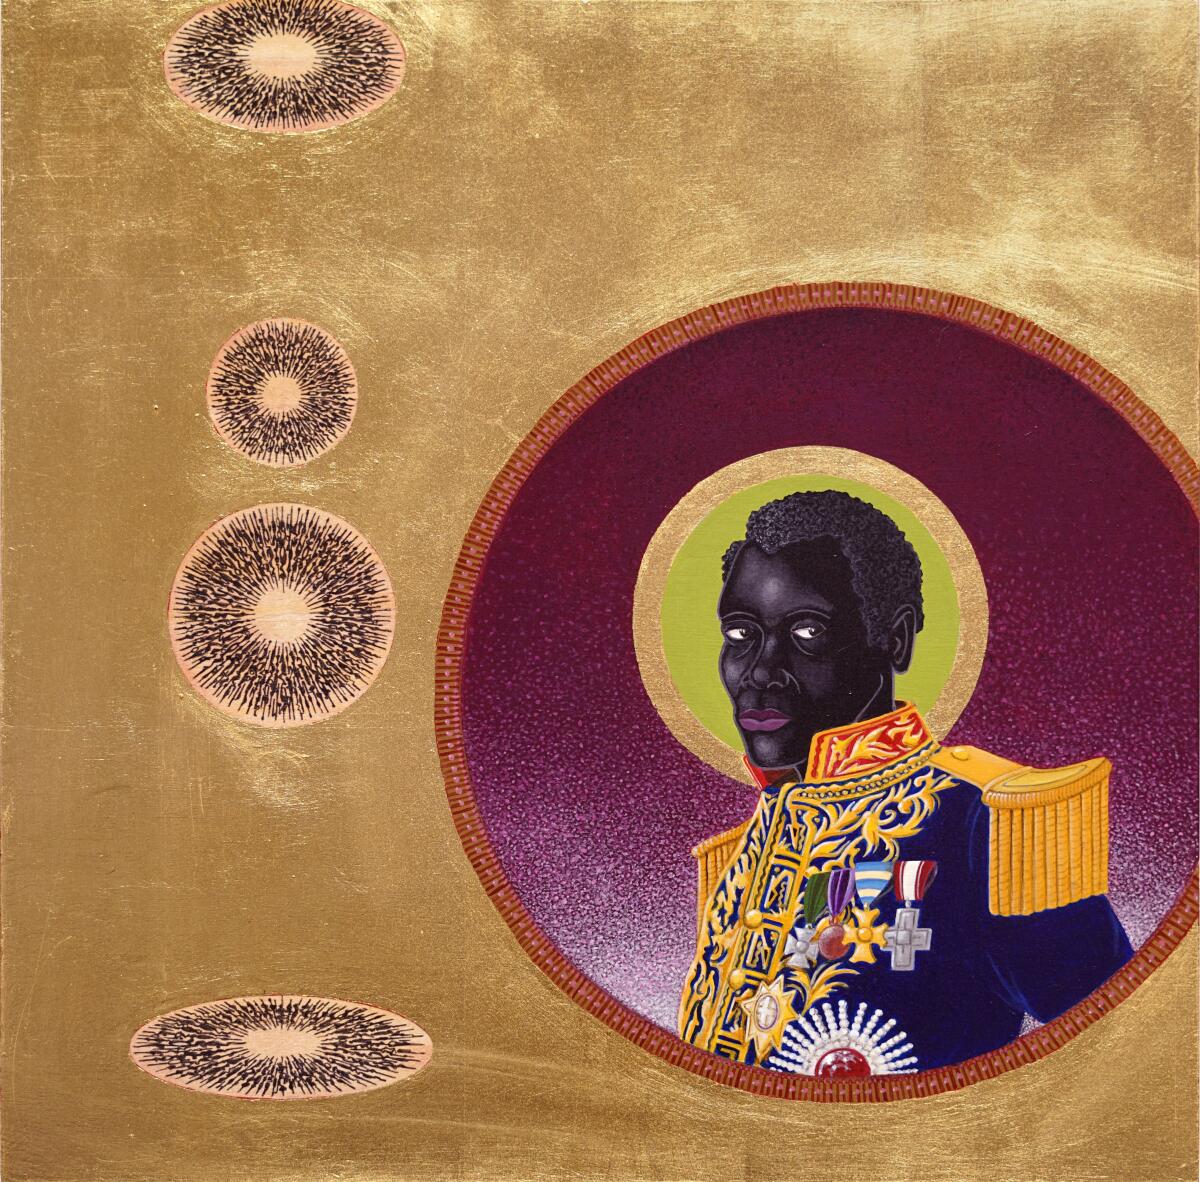 A painting framed in gold leaf features a bust-length portrait of Toussaint Louverture in military uniform